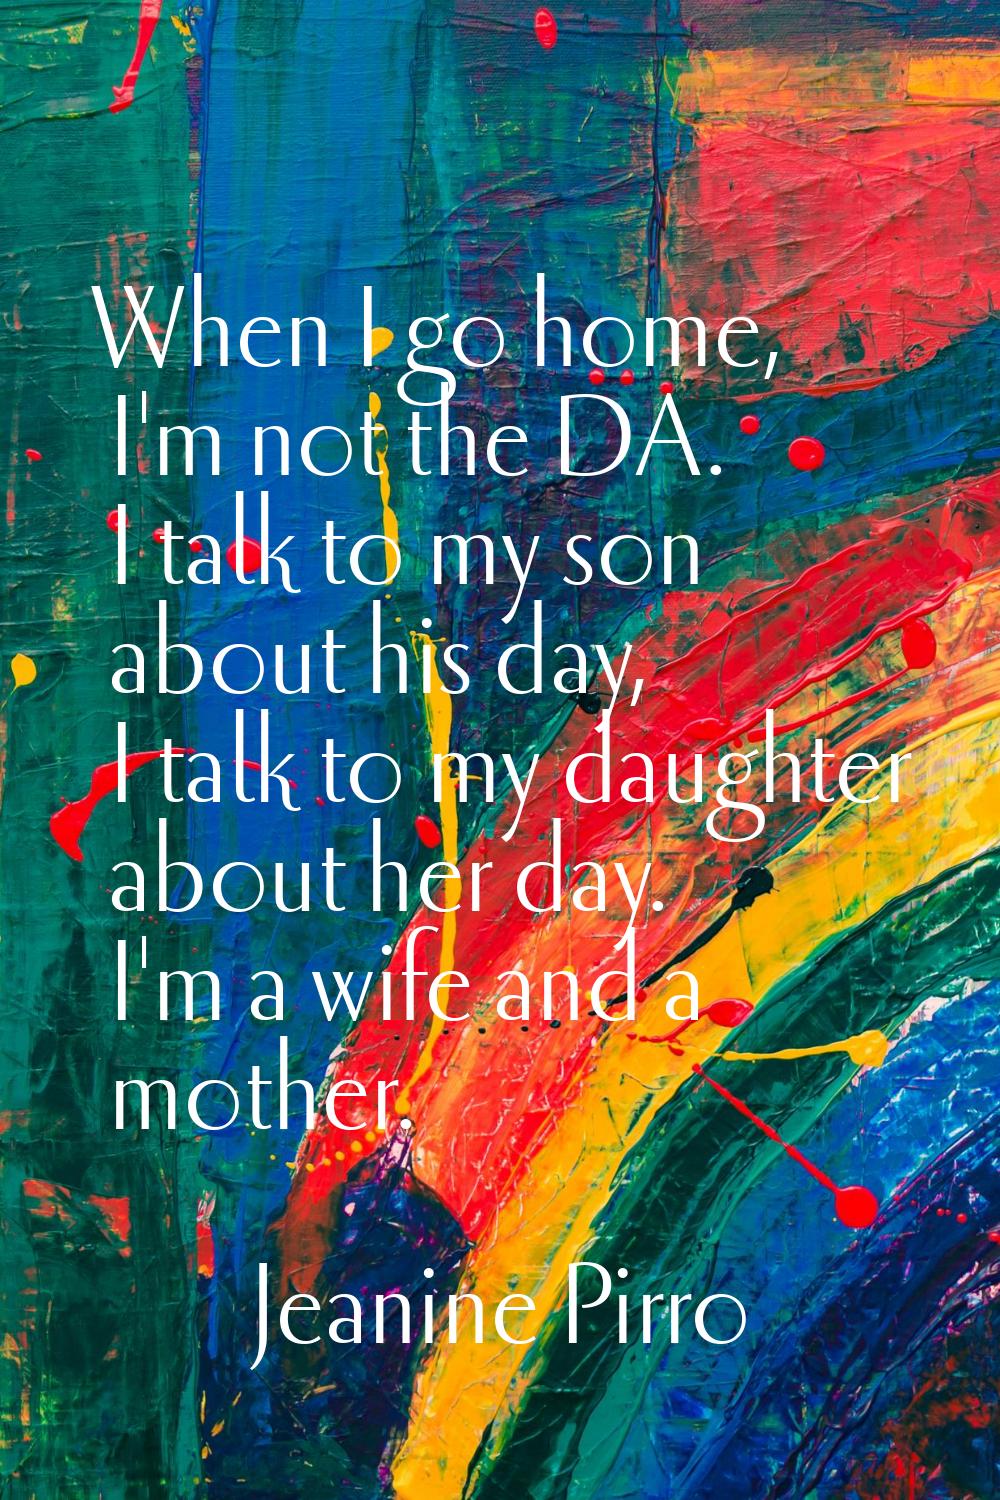 When I go home, I'm not the DA. I talk to my son about his day, I talk to my daughter about her day